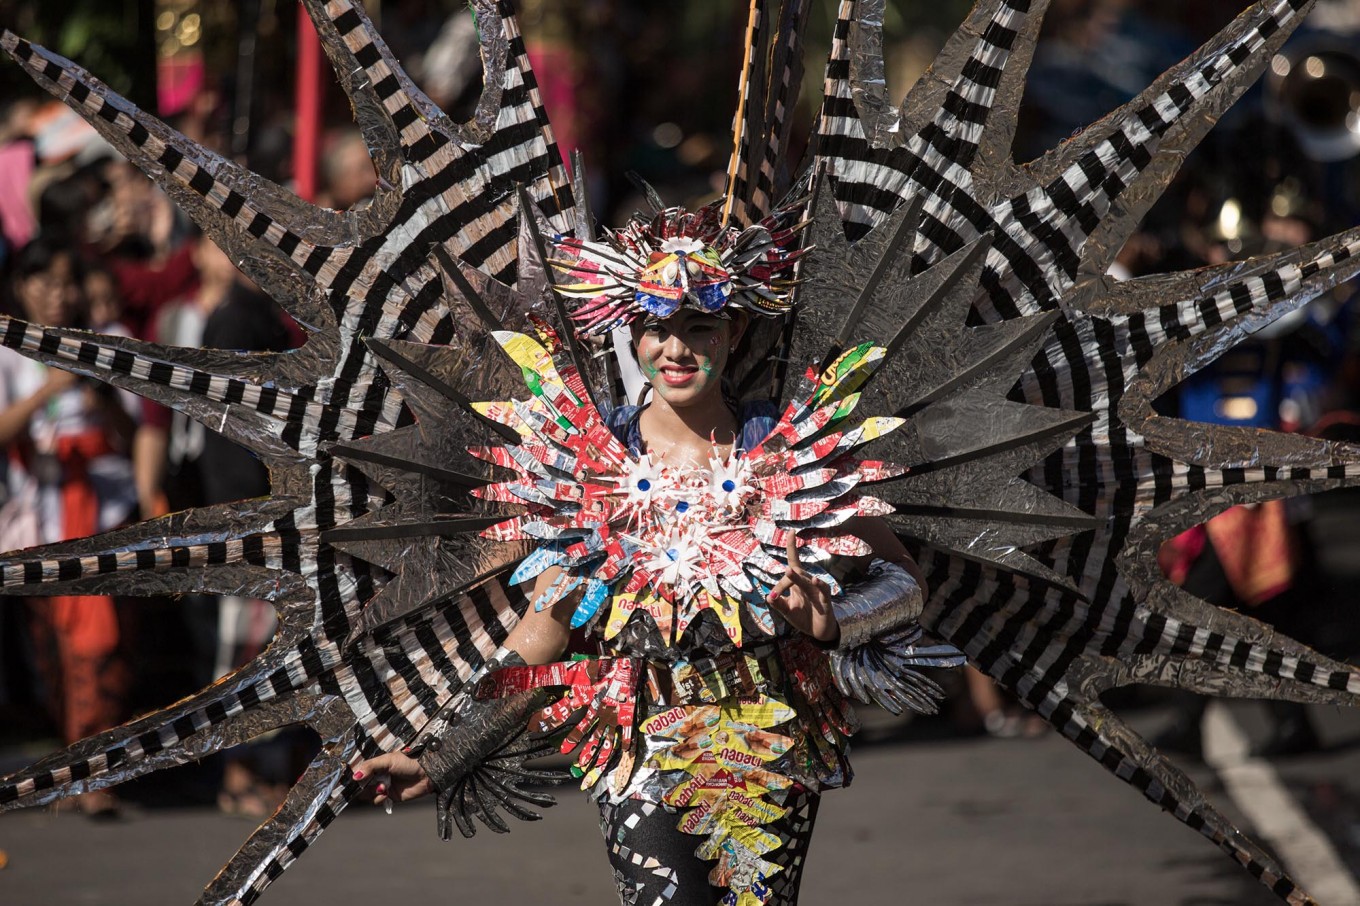 A Balinese woman performs during the opening of the 39th Bali Art Festival at the Bajra Sandhi Monument in Denpasar. Image: JP/Agung Parameswara